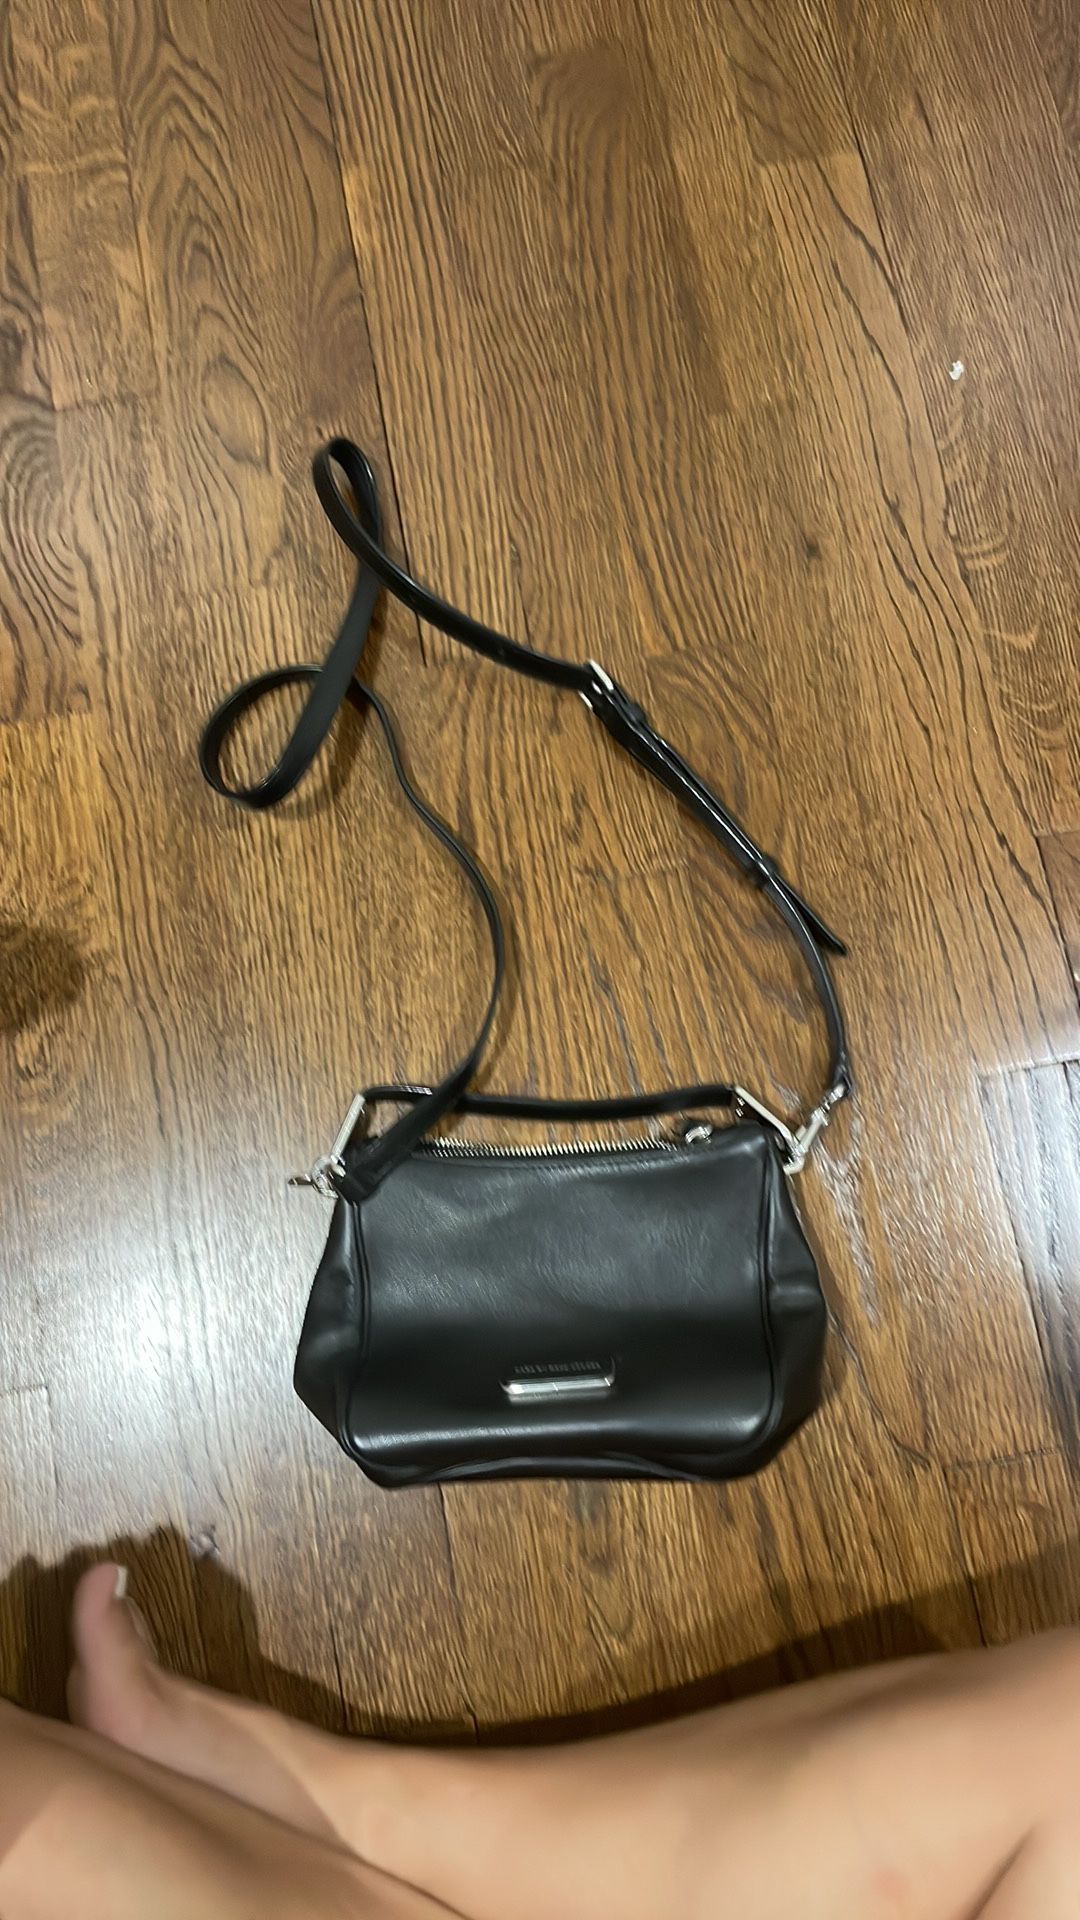 Marc by Marc Jacobs Crossbody for Sale in White Plains, NY - OfferUp